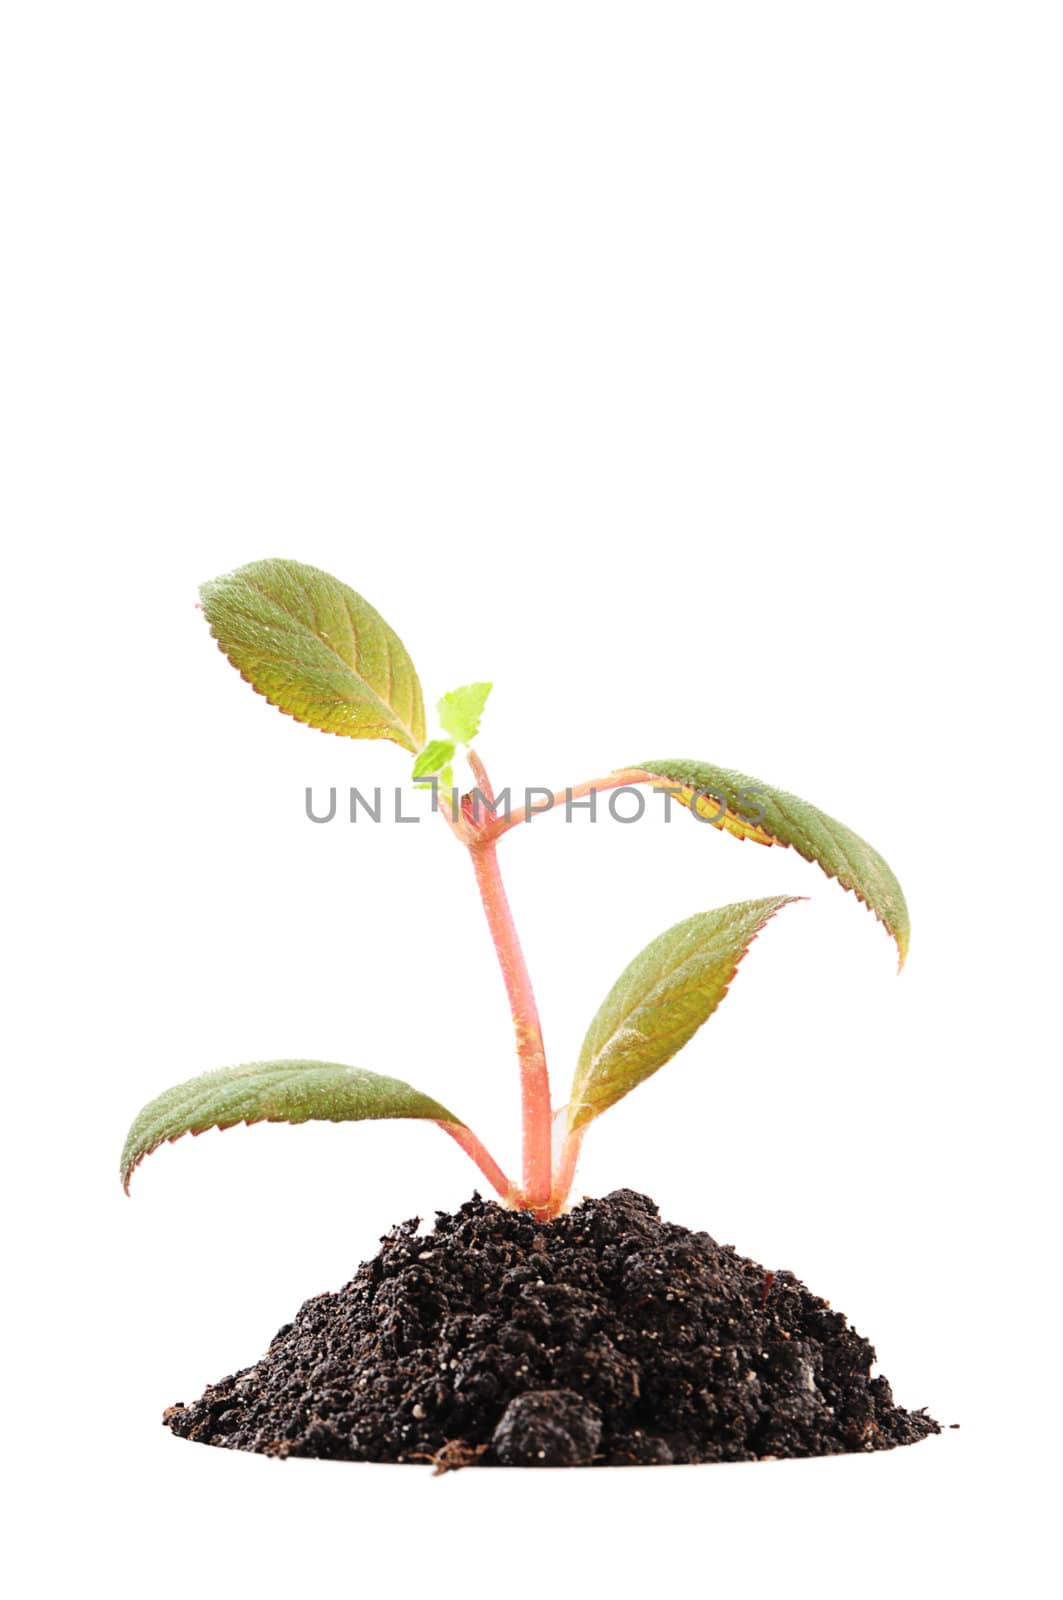 Green sprout growing from soil. Isolated on white.